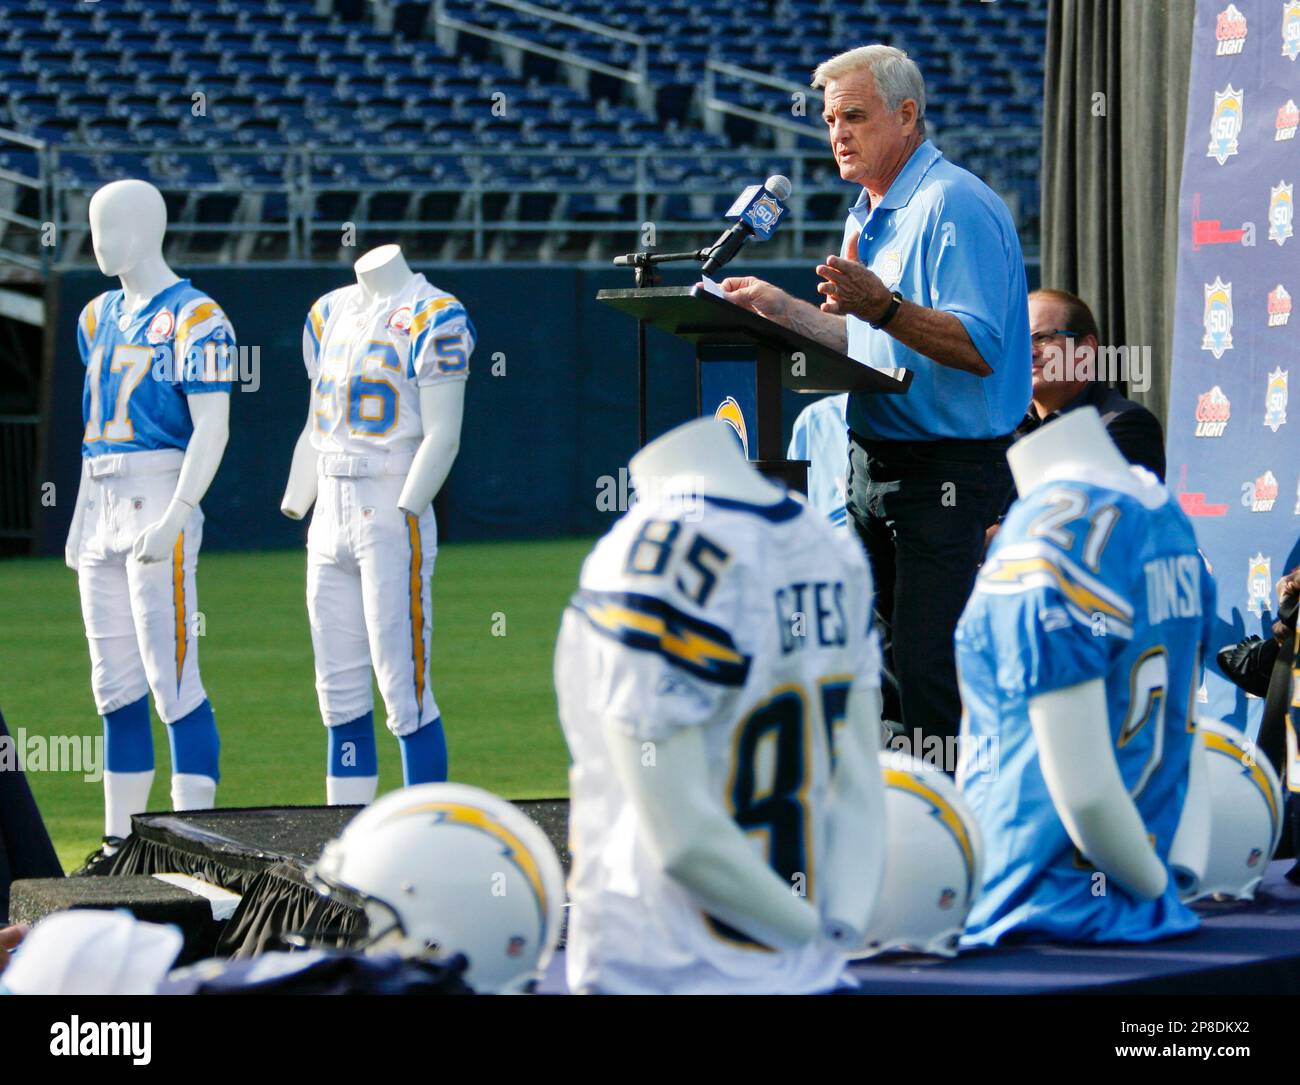 Former San Diego Chargers player Lance Alworth speaks during a news  conference at Qualcomm Stadium on Monday, June 1, 2009 in San Diego. The  Chargers gathered former players from the past five